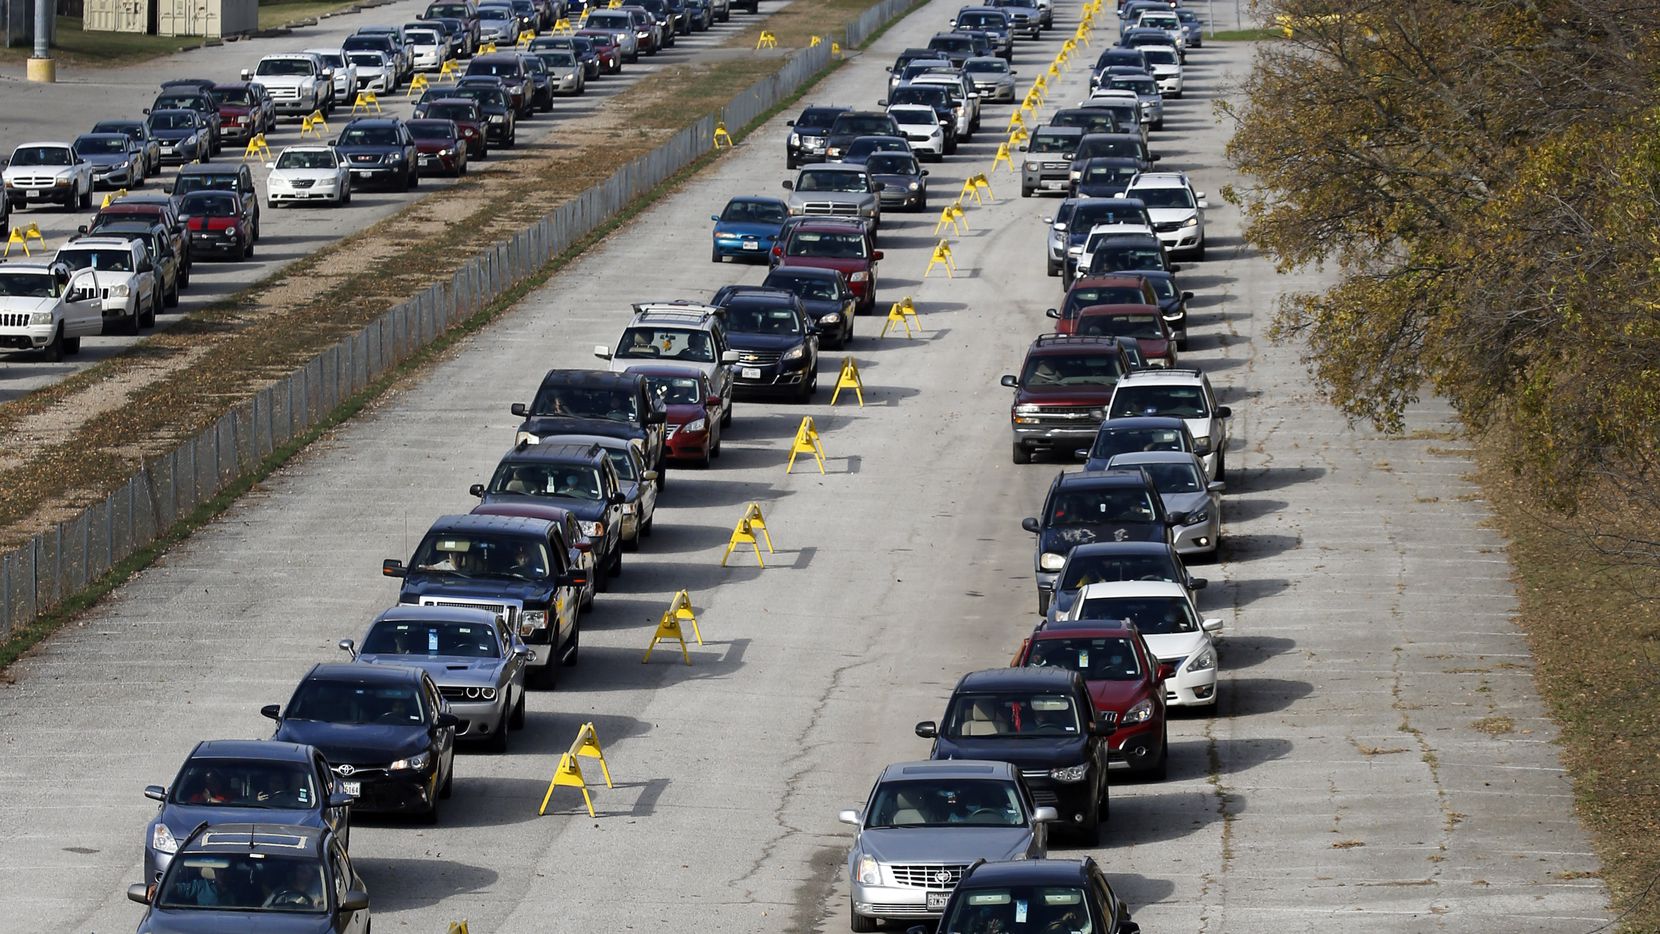 Thousands of vehicles lined up for food at Fair Park in Dallas on Nov. 14. Over half a million people in Dallas-Fort Worth didn't have enough to eat in the previous week, according to estimates from a recent pulse survey by the U.S. Census Bureau.